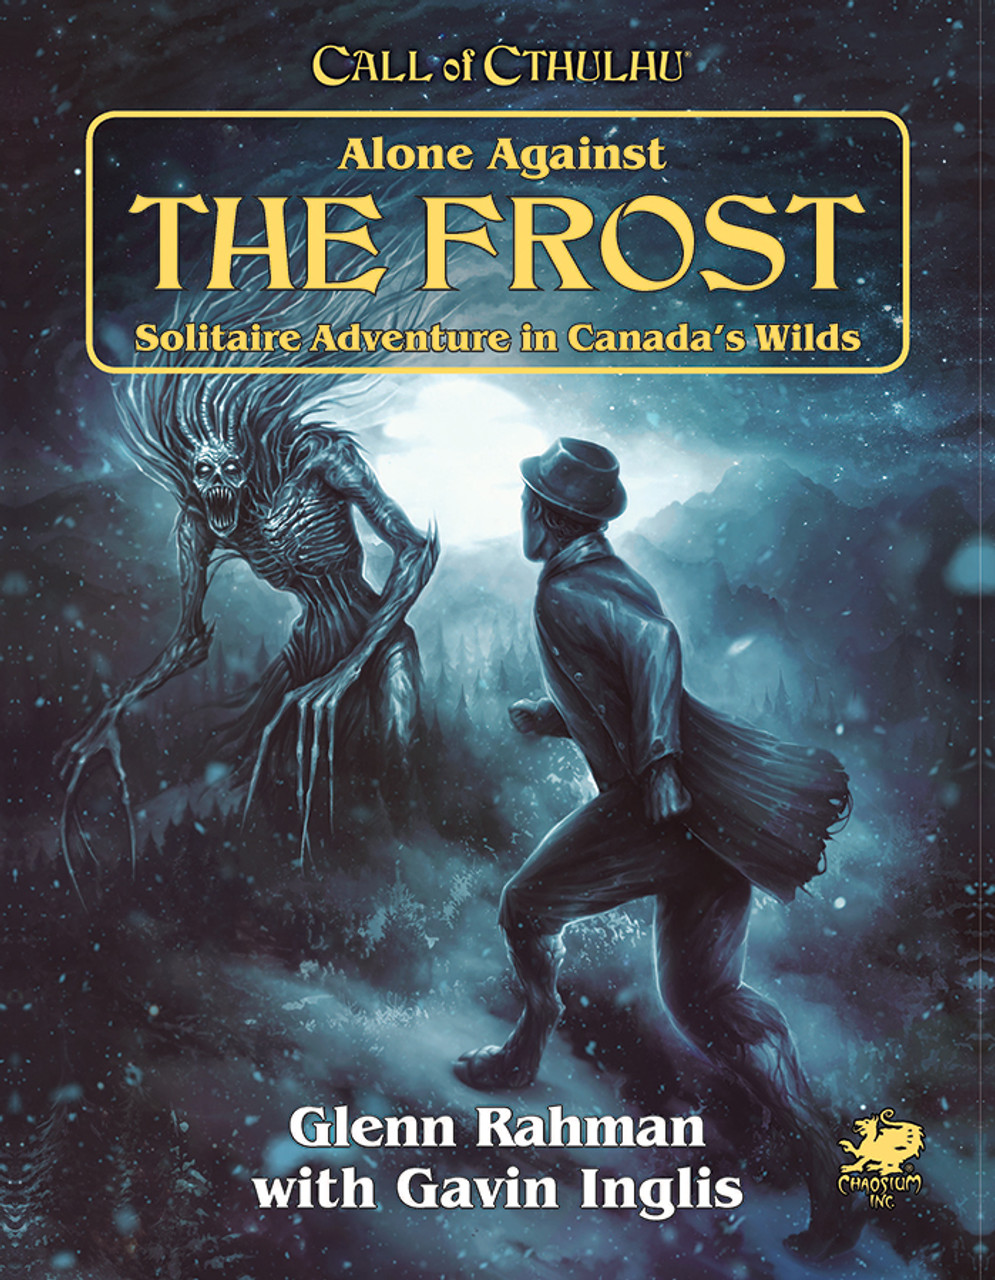 Alone Against the Frost: Solitaire Adventure in Canada's Wilds [Book]